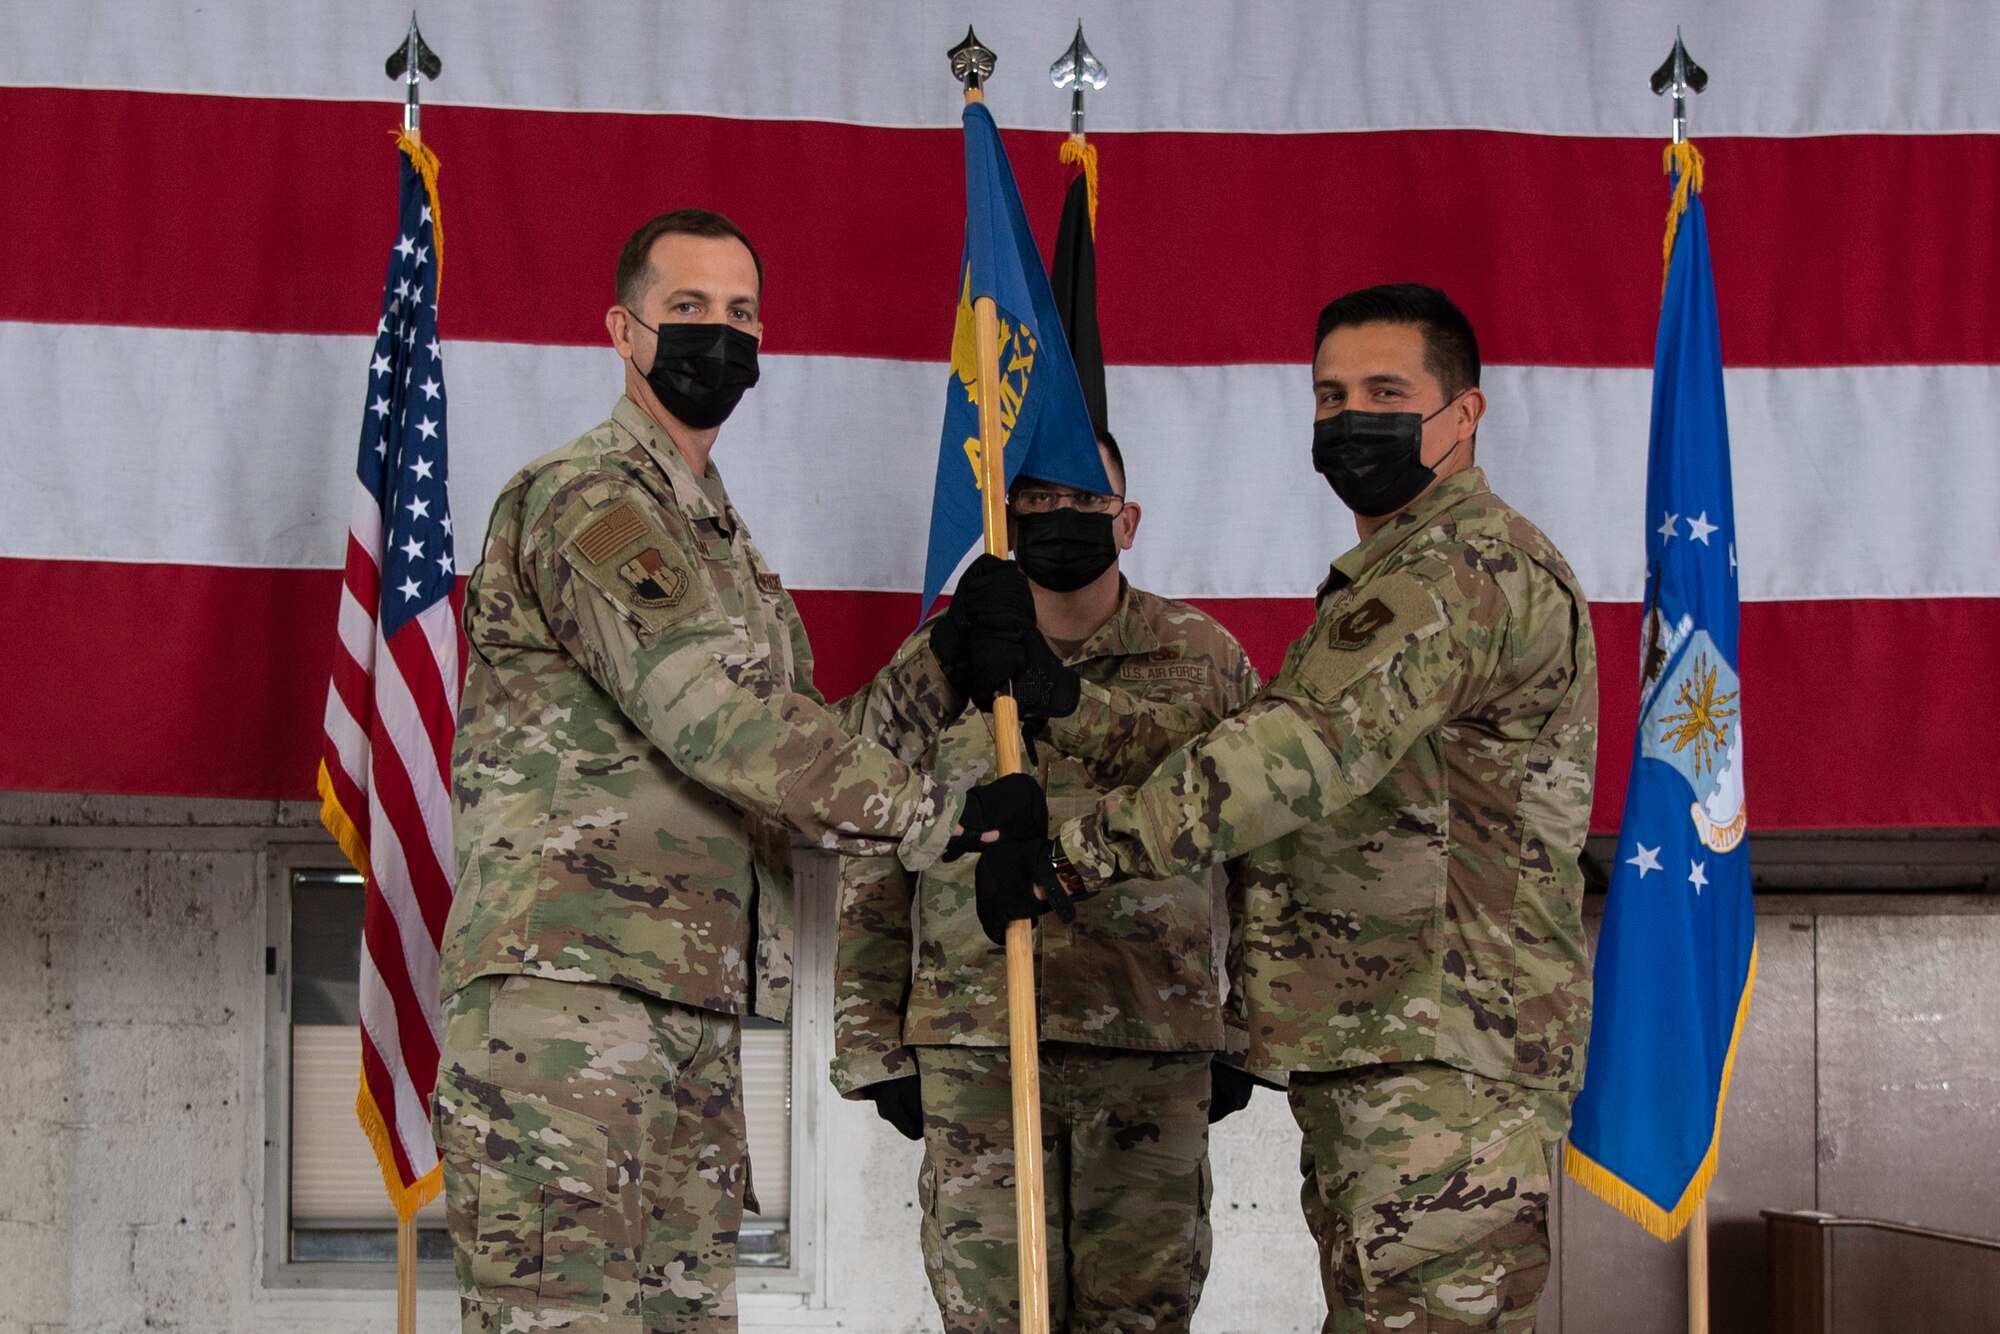 U.S. Air Force Col. James Vinson, 52nd Maintenance Group commander (left), passes the 52nd Aircraft Maintenance Squadron guidon to Maj. Bryan Beals, 52nd AMXS commander, during the squadron’s assumption of command ceremony, July 6, 2021, on Spangdahlem Air Base, Germany. The 52nd Maintenance Group provides field-level maintenance for a fleet of F-16 Fighting Falcon aircraft supporting the Supreme Allied Commander Europe with expeditionary airpower, specializing in suppression of enemy air defenses, air interdiction, strategic attack, close air support, and combat search and rescue missions. (U.S. Air Force photo by Staff Sgt. Melody W. Howley)